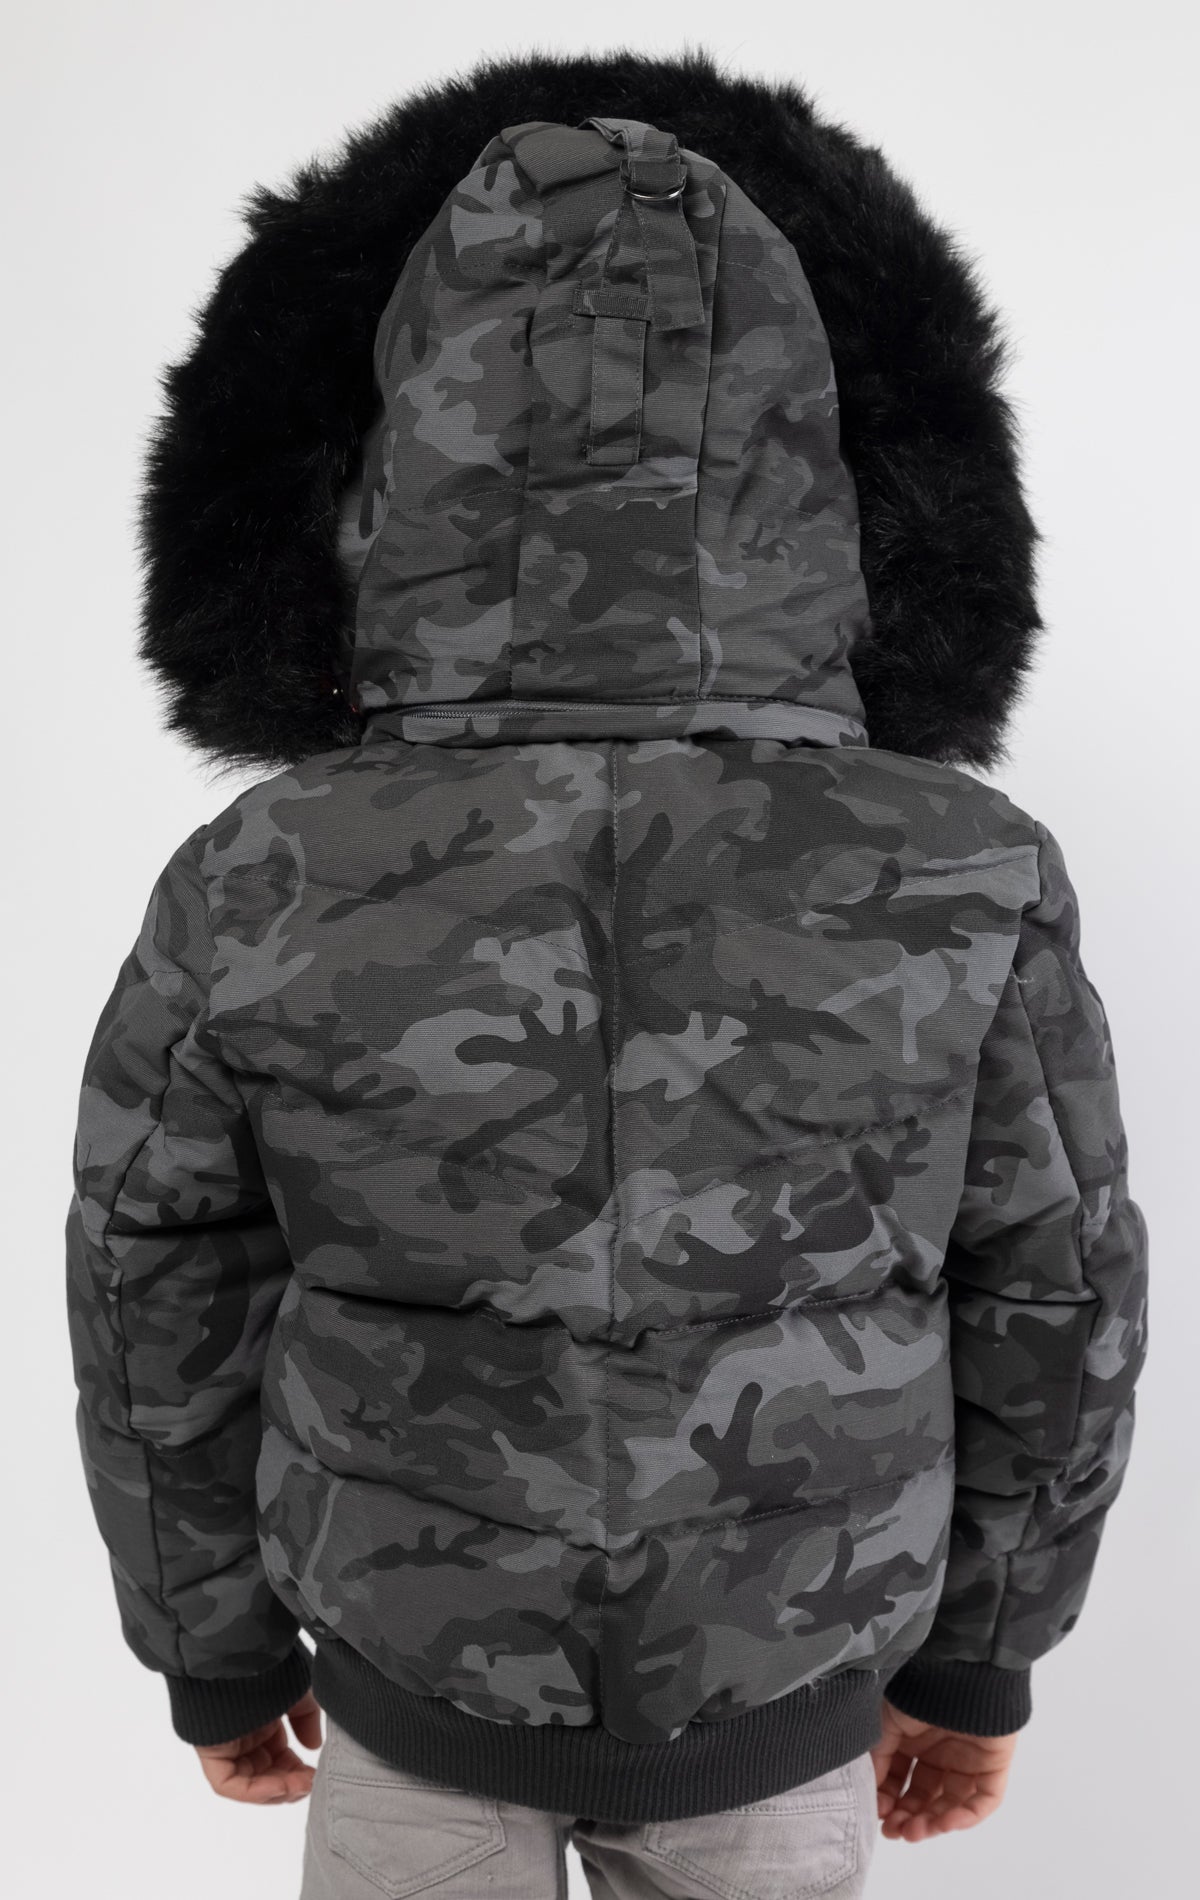 Full zip bomber jacket silhouette, with quilted padding and dense insulation for extreme warmth. Made with 100% polyester lining and featuring a removable faux jackal fur collar and hood. Available in woodland and black camo.